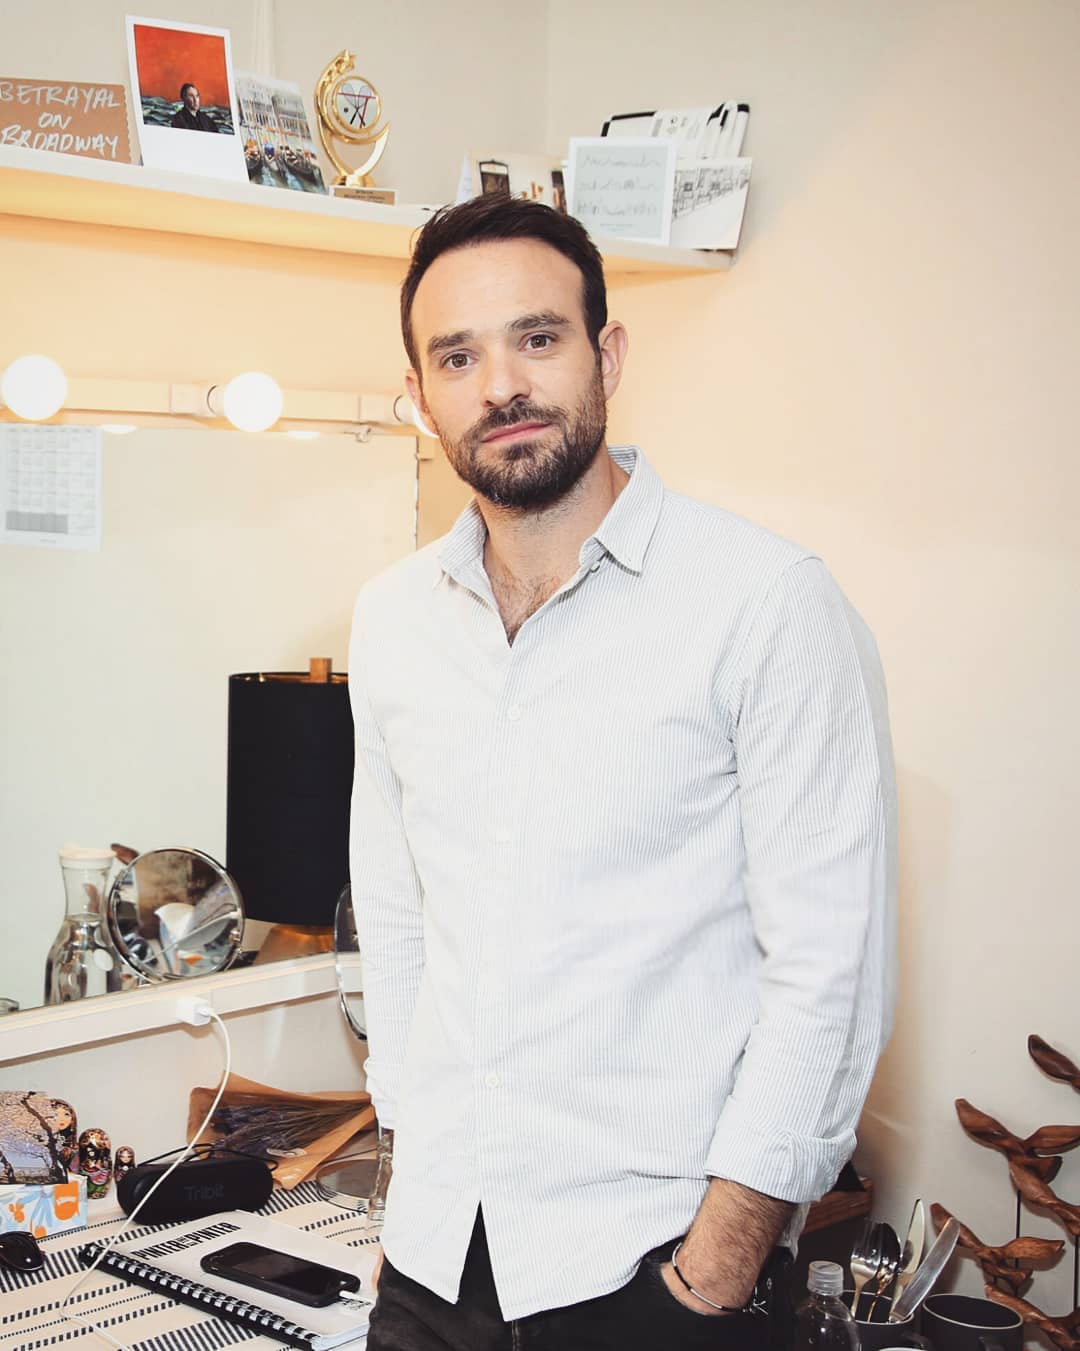 Charlie Cox during a Broadway Photo Shoot at the Bernard B. Jacobs Theatre